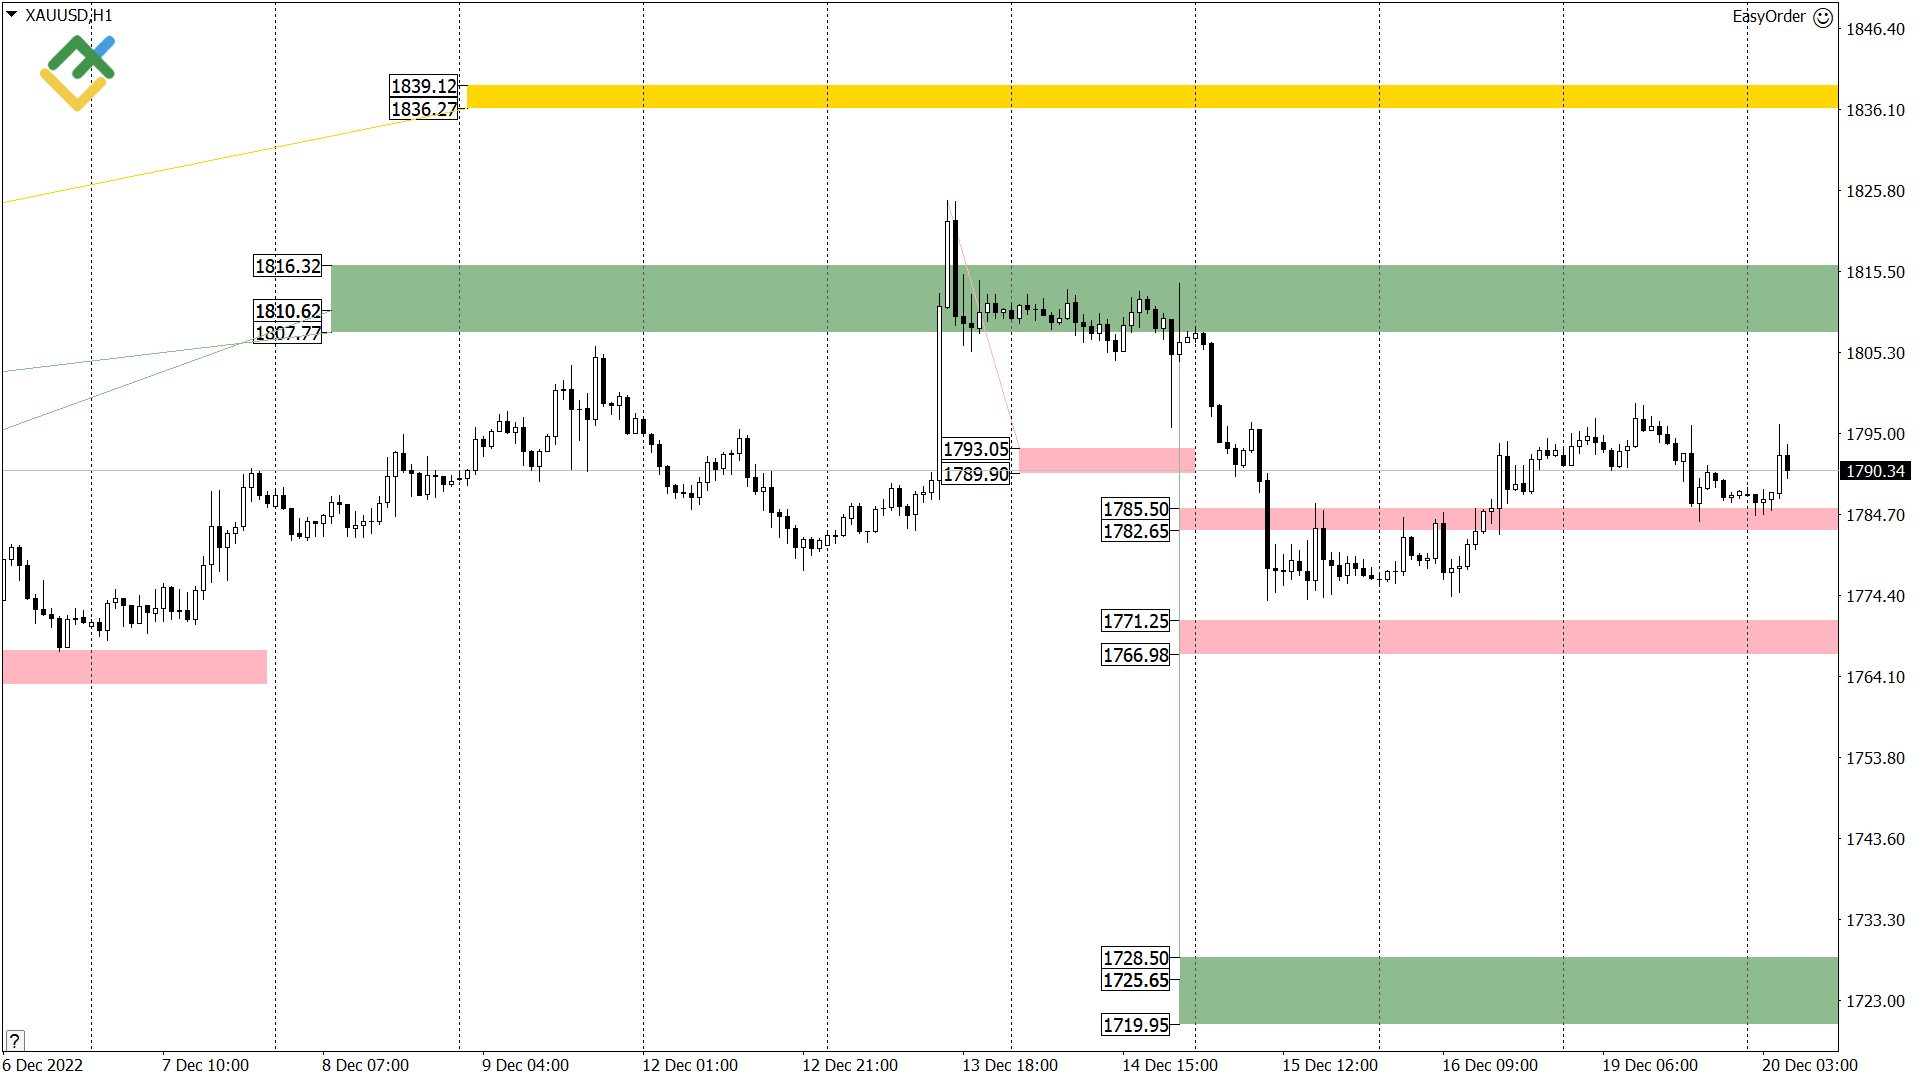 LiteFinance: Technical analysis of US Crude, XAUUSD, and EURUSD for today (20 December 2022)